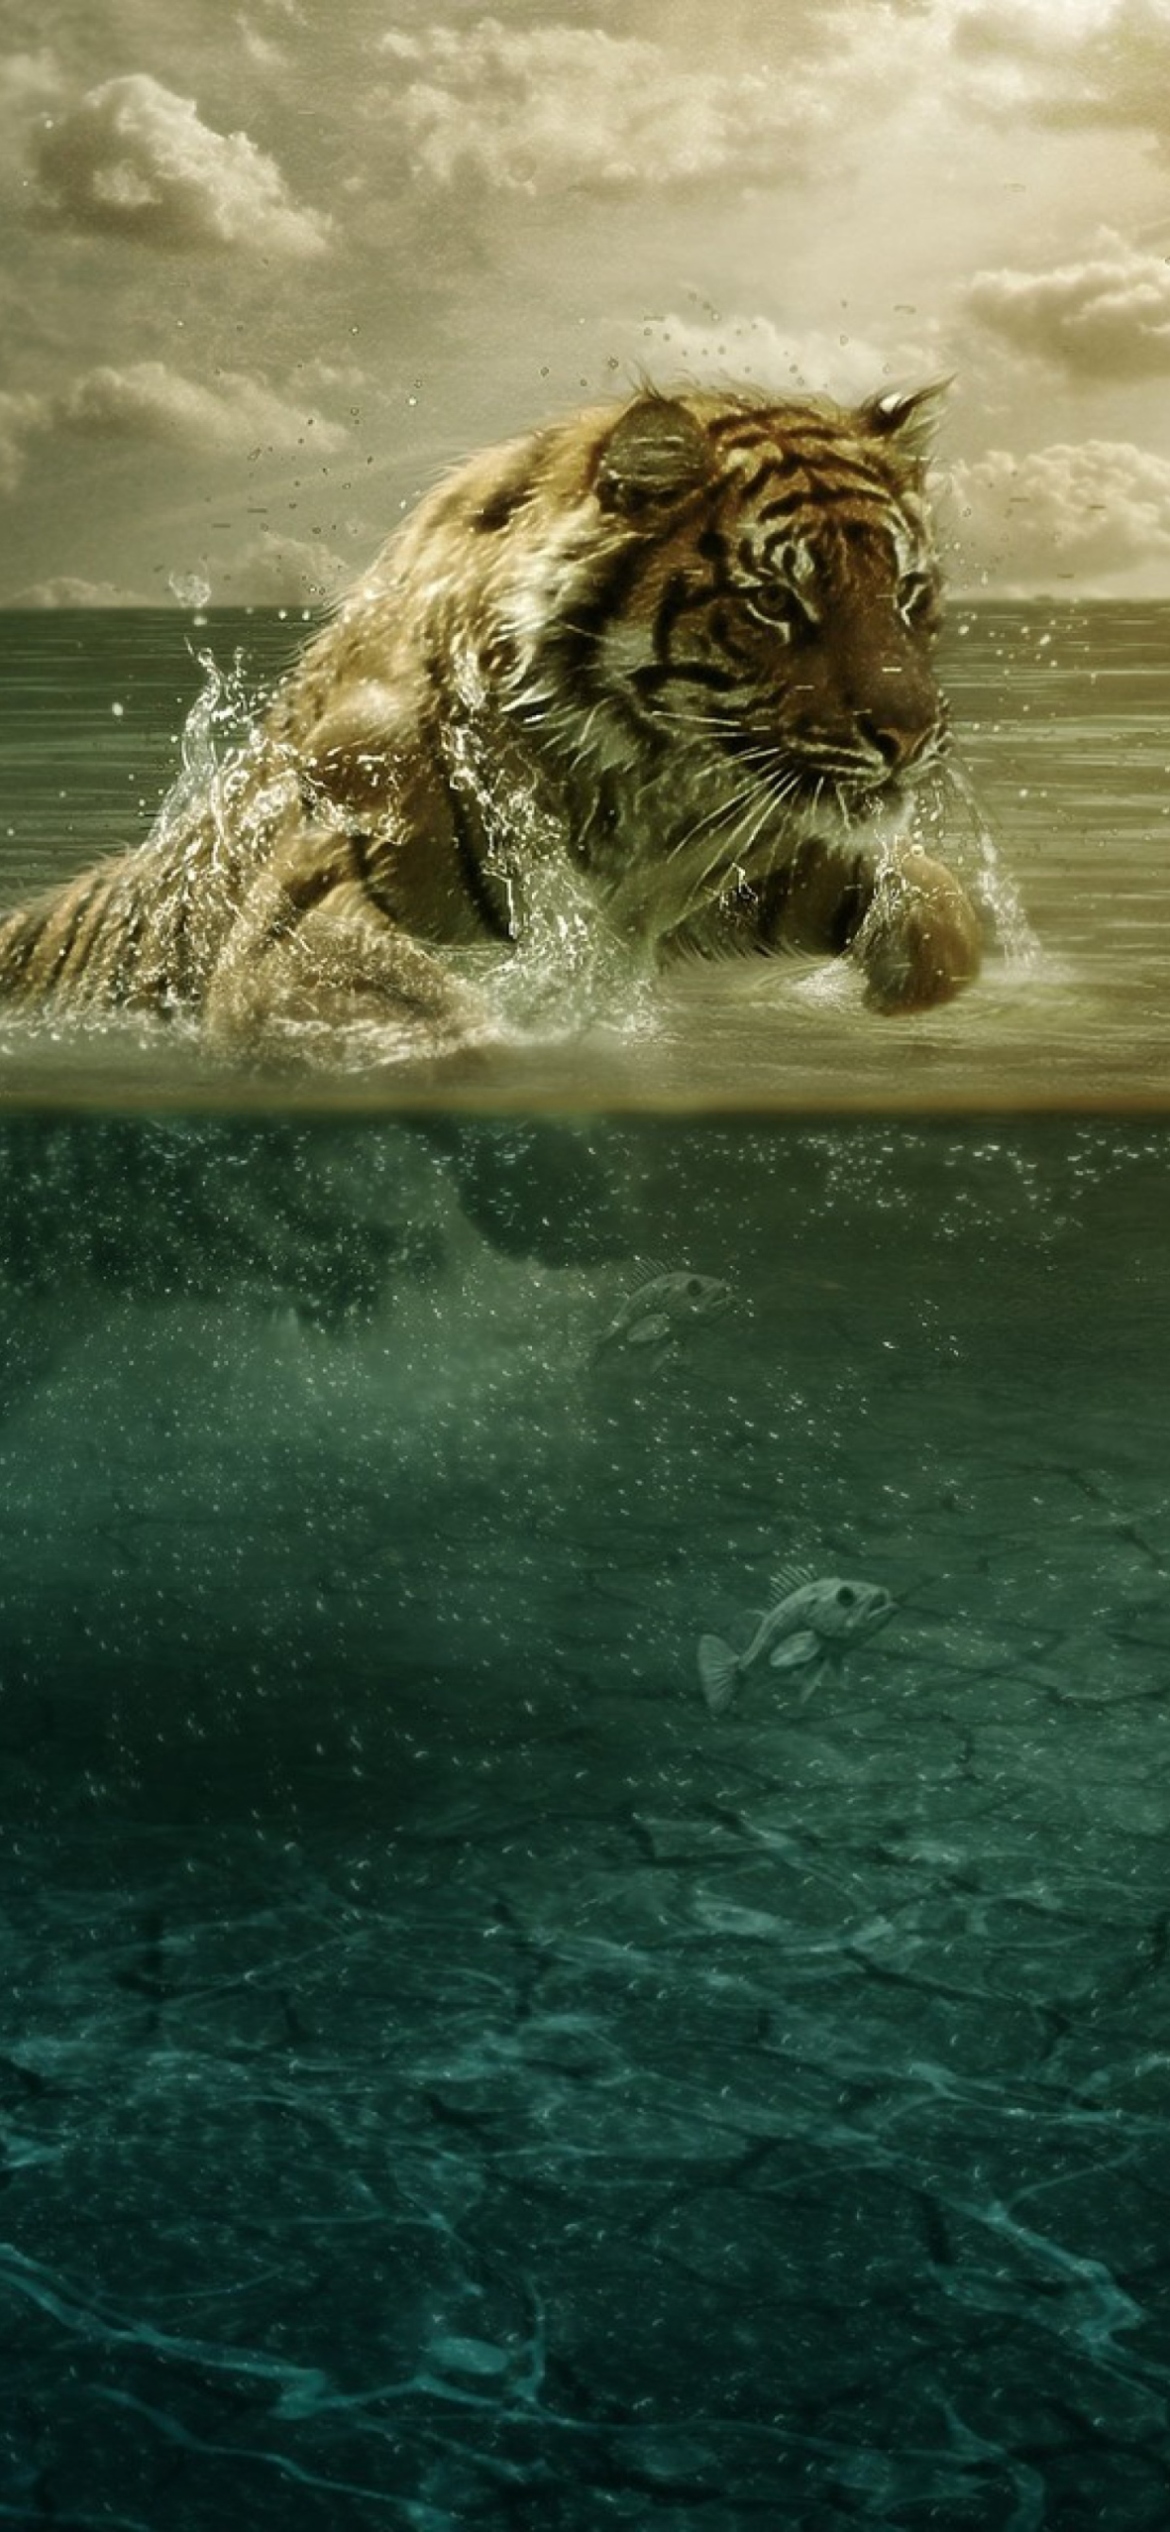 Tiger Jumping Out Of Water wallpaper 1170x2532